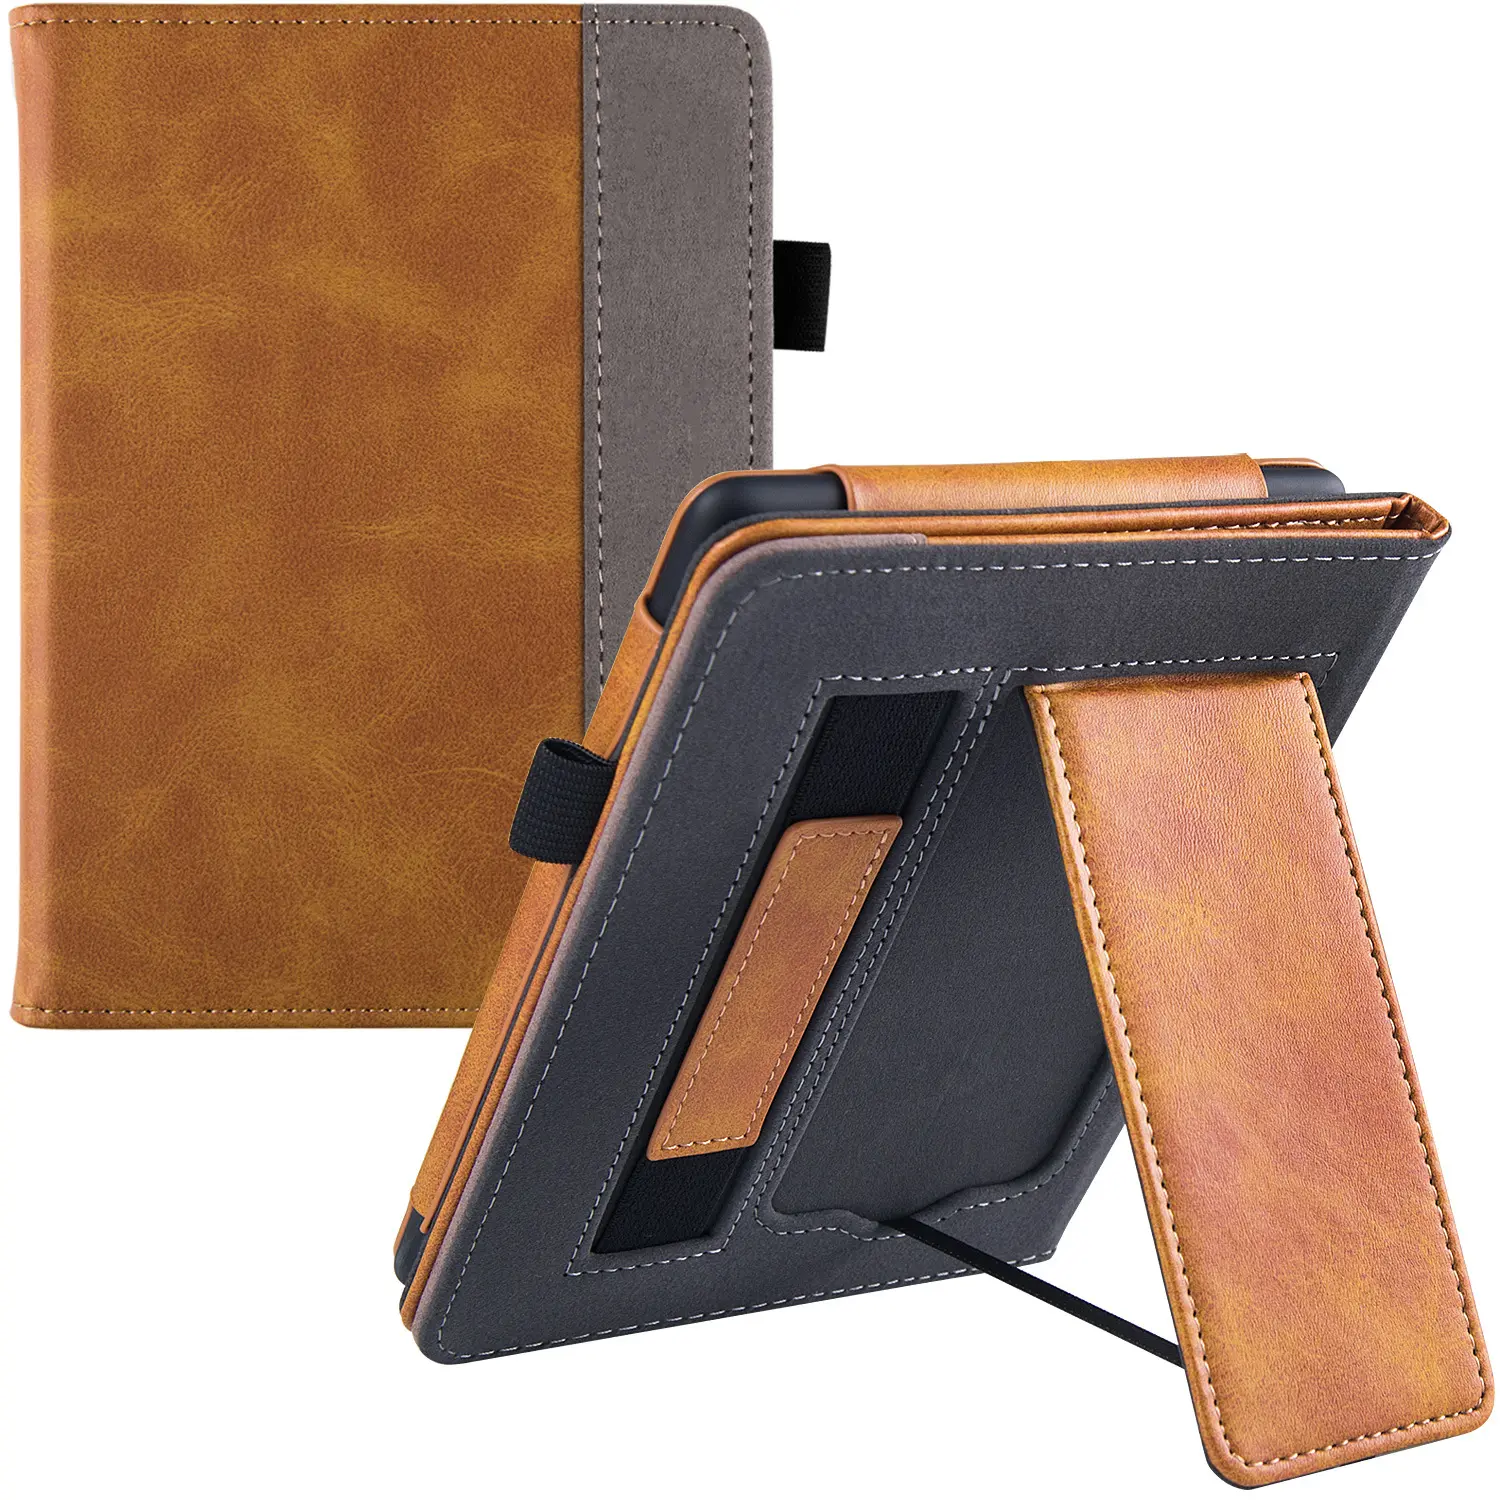 Custom Leather Kindle Paperwhite Case With Holder Magnetic Pencil Kickstand Hard For Ipad Mini 6 Pro Air 5 Cases